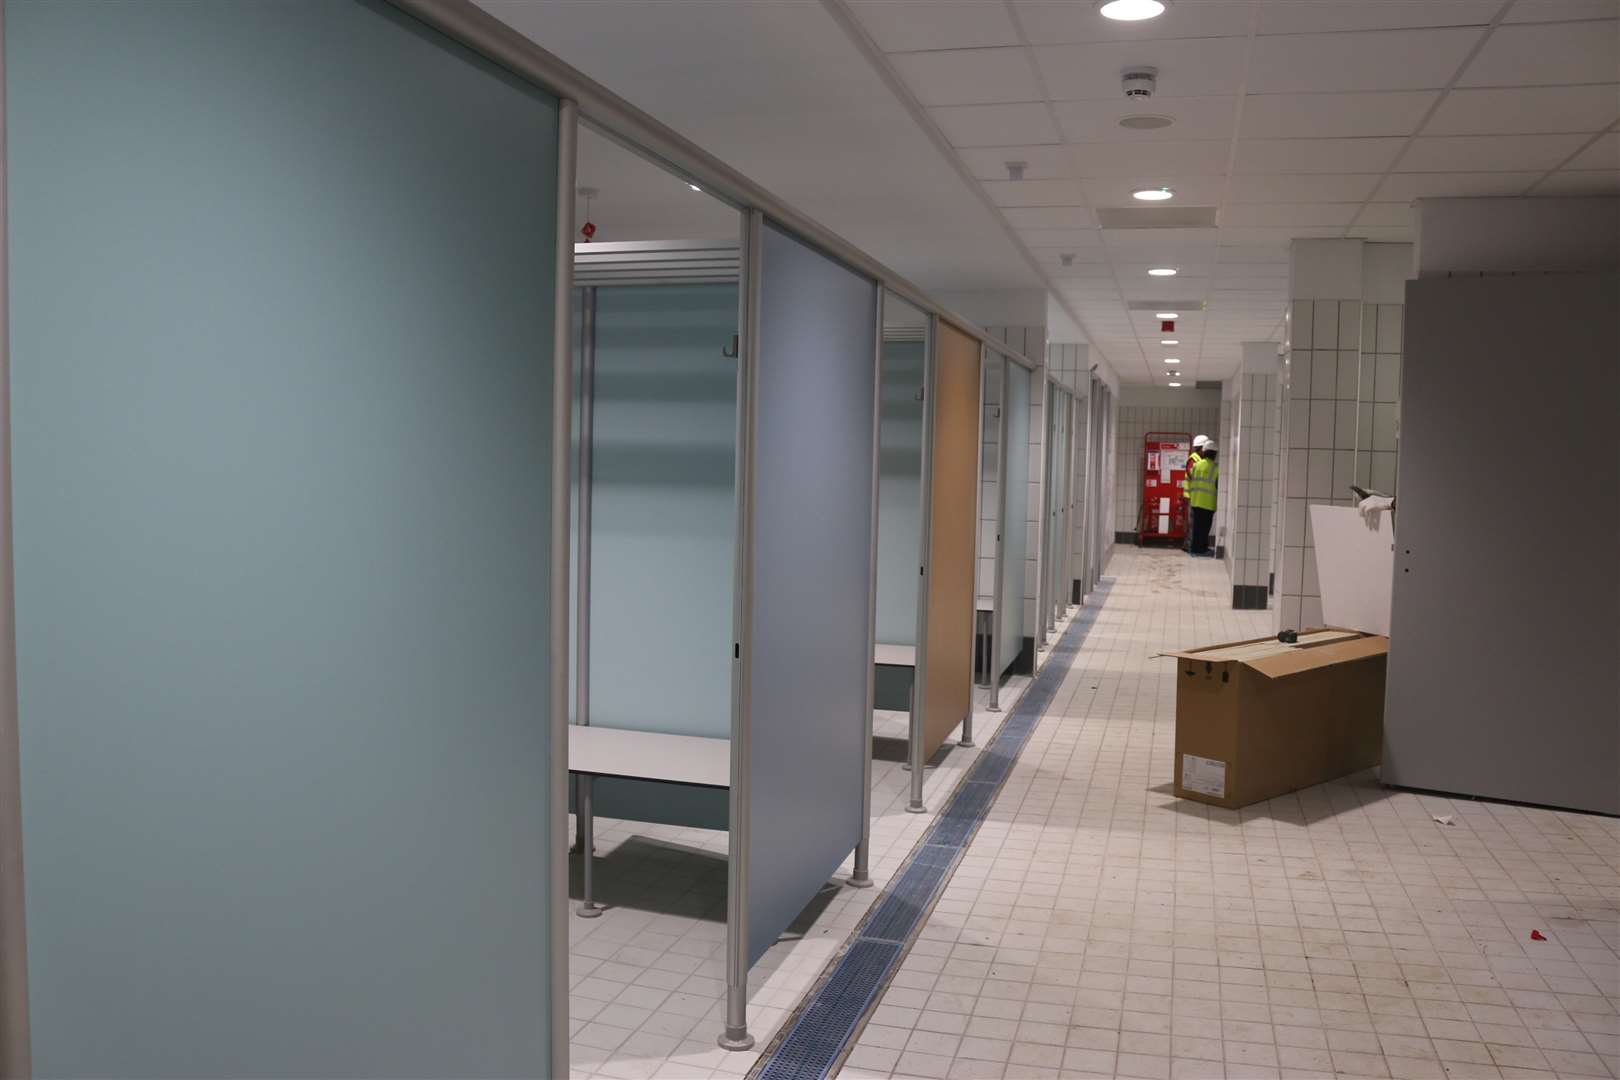 Fairfield's changing rooms have been upgraded significantly.